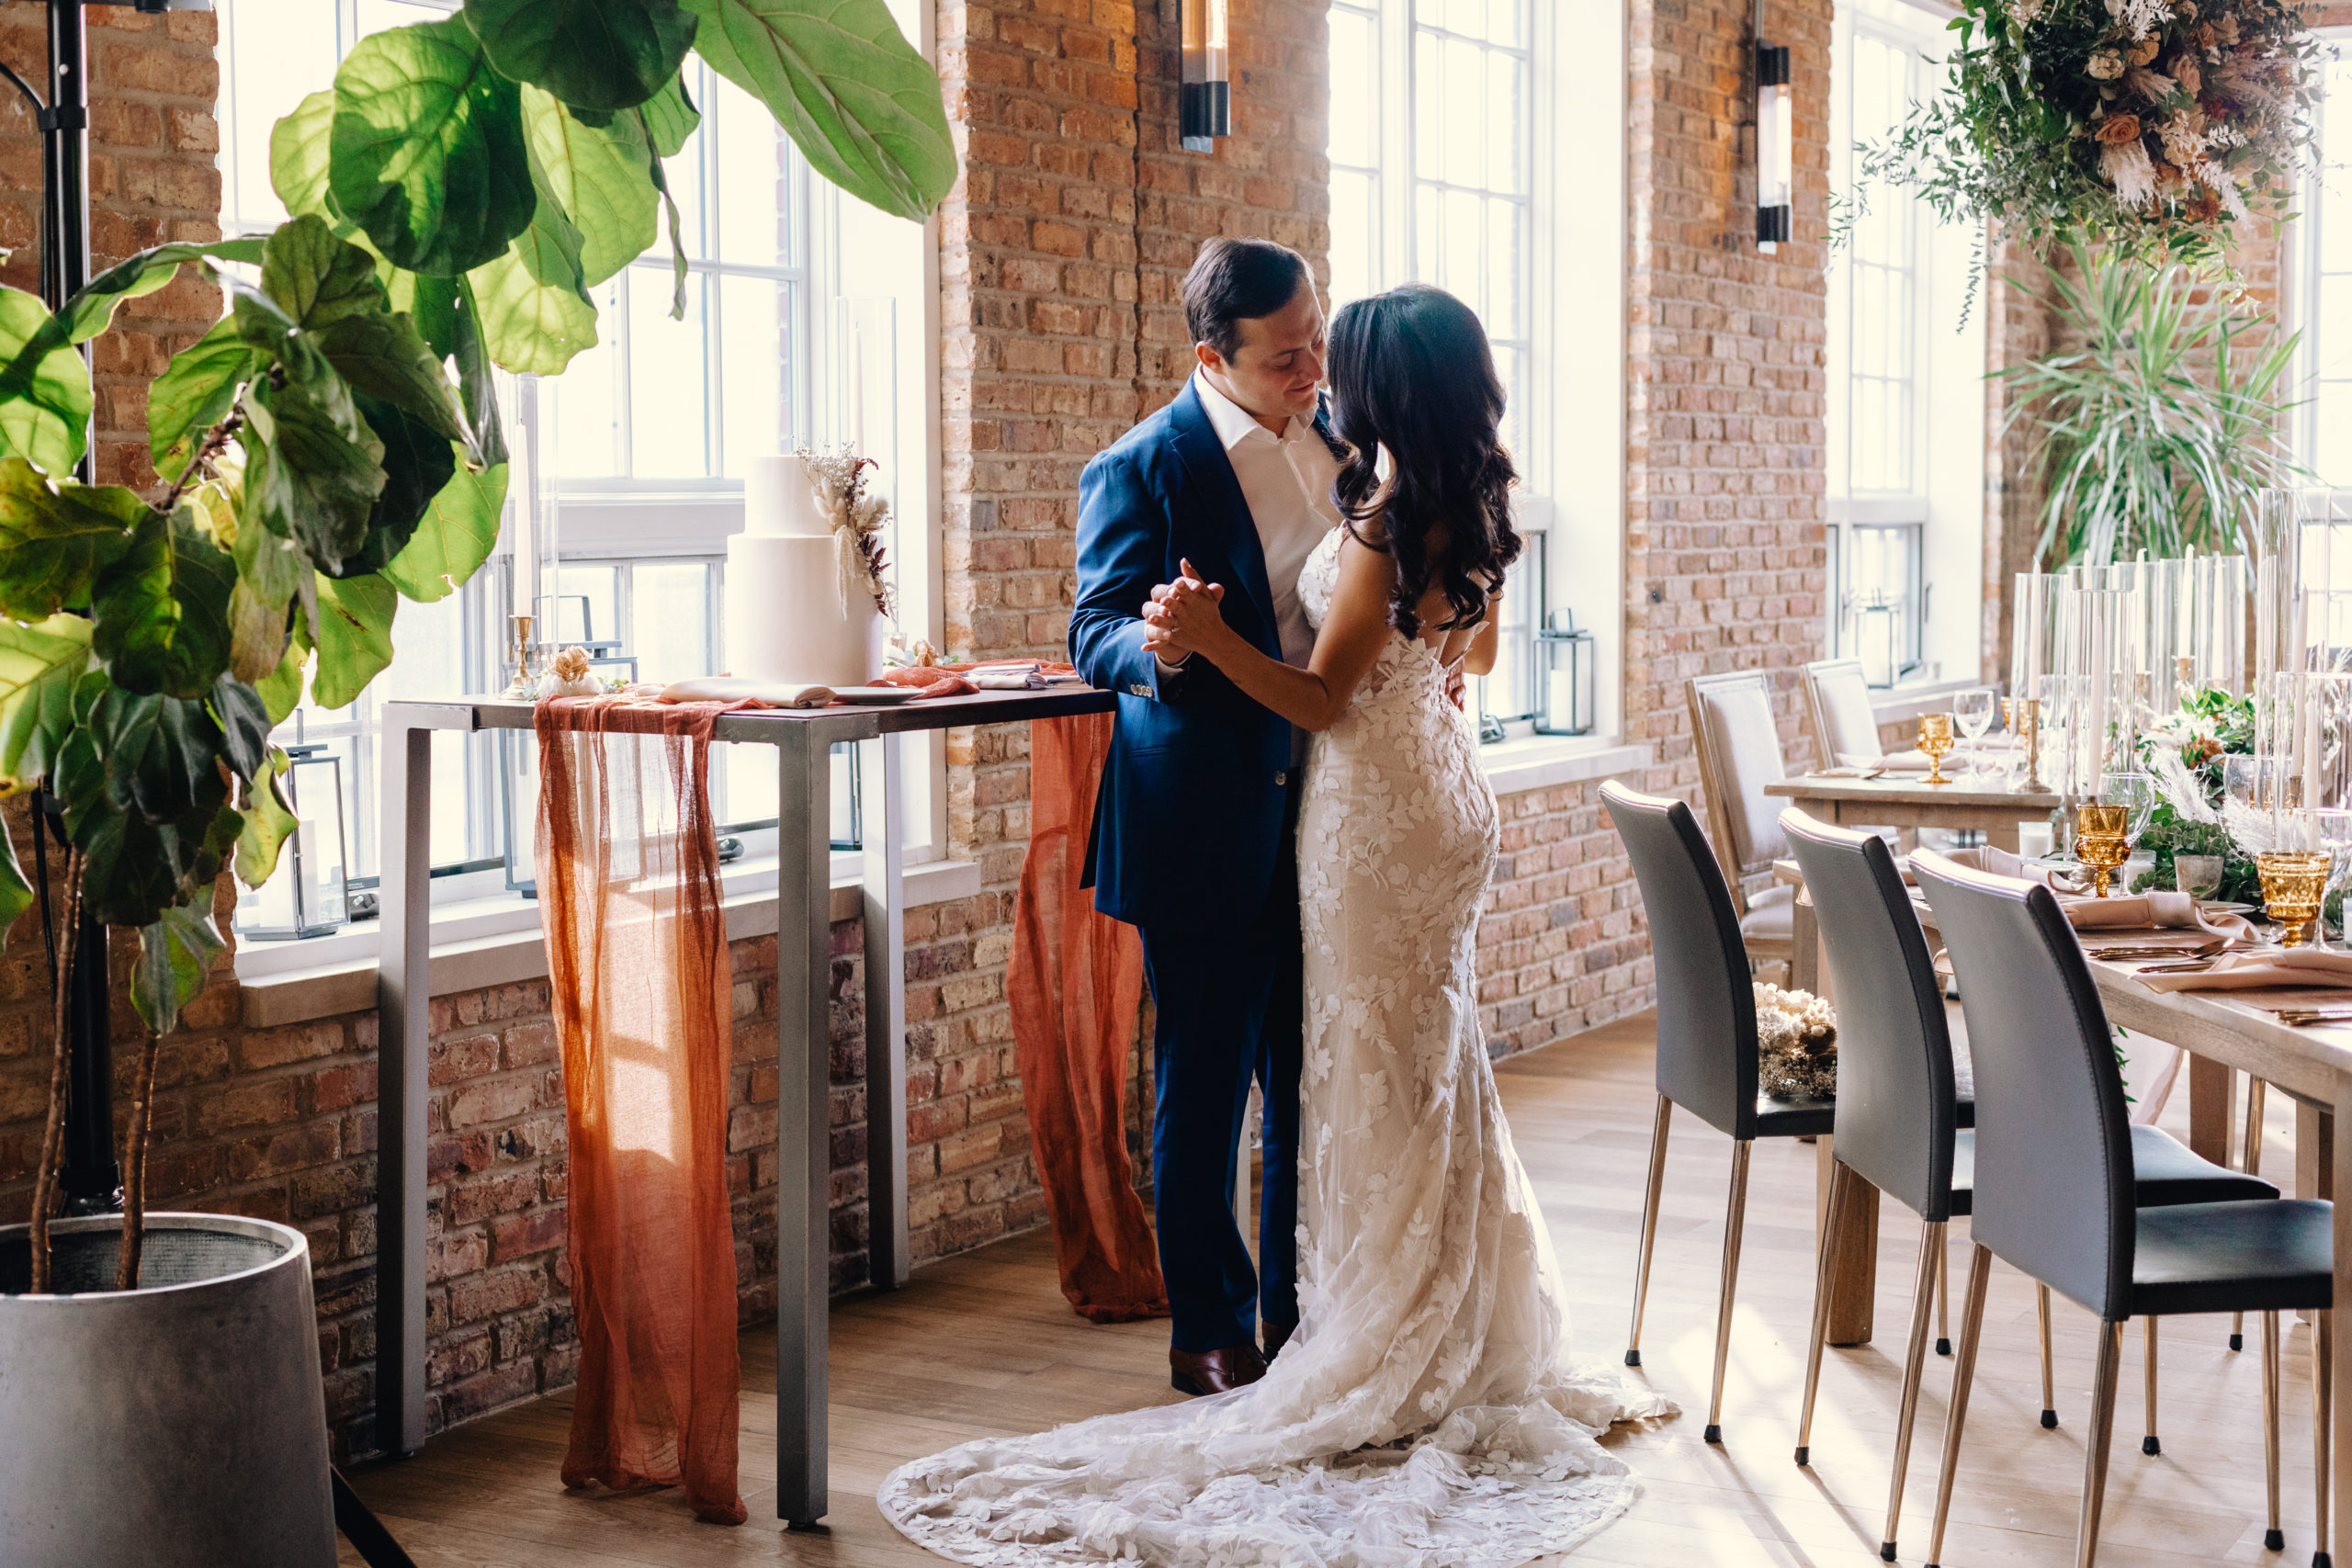 Our Formal Elopement Reception + Tip For Planning a Marriage Celebration